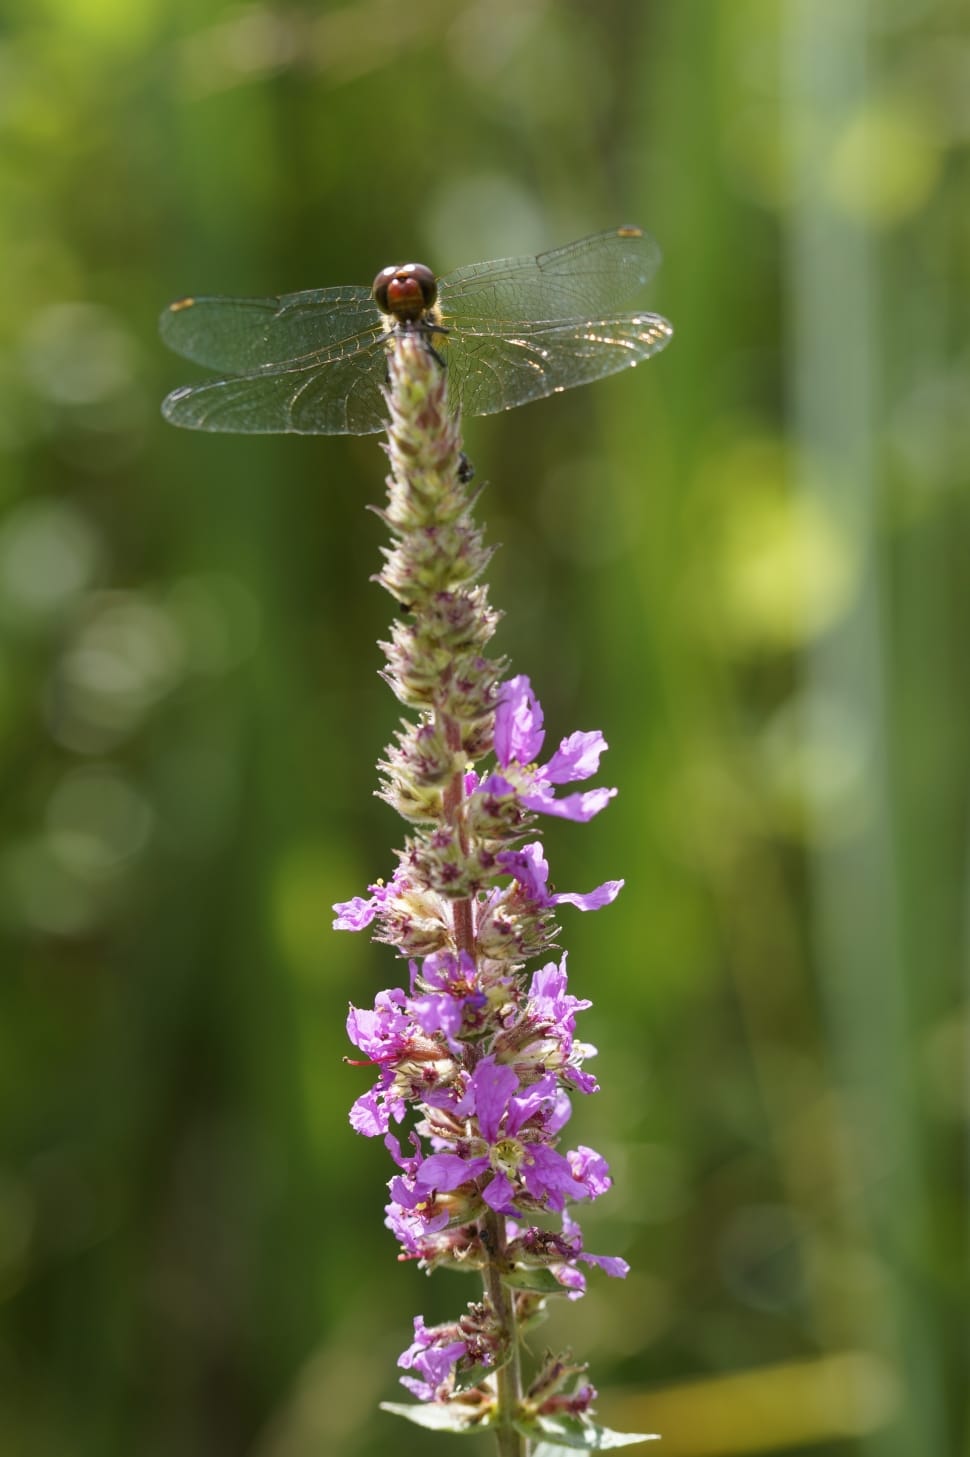 dragonfly perched on lavender flower in selective focus photography preview